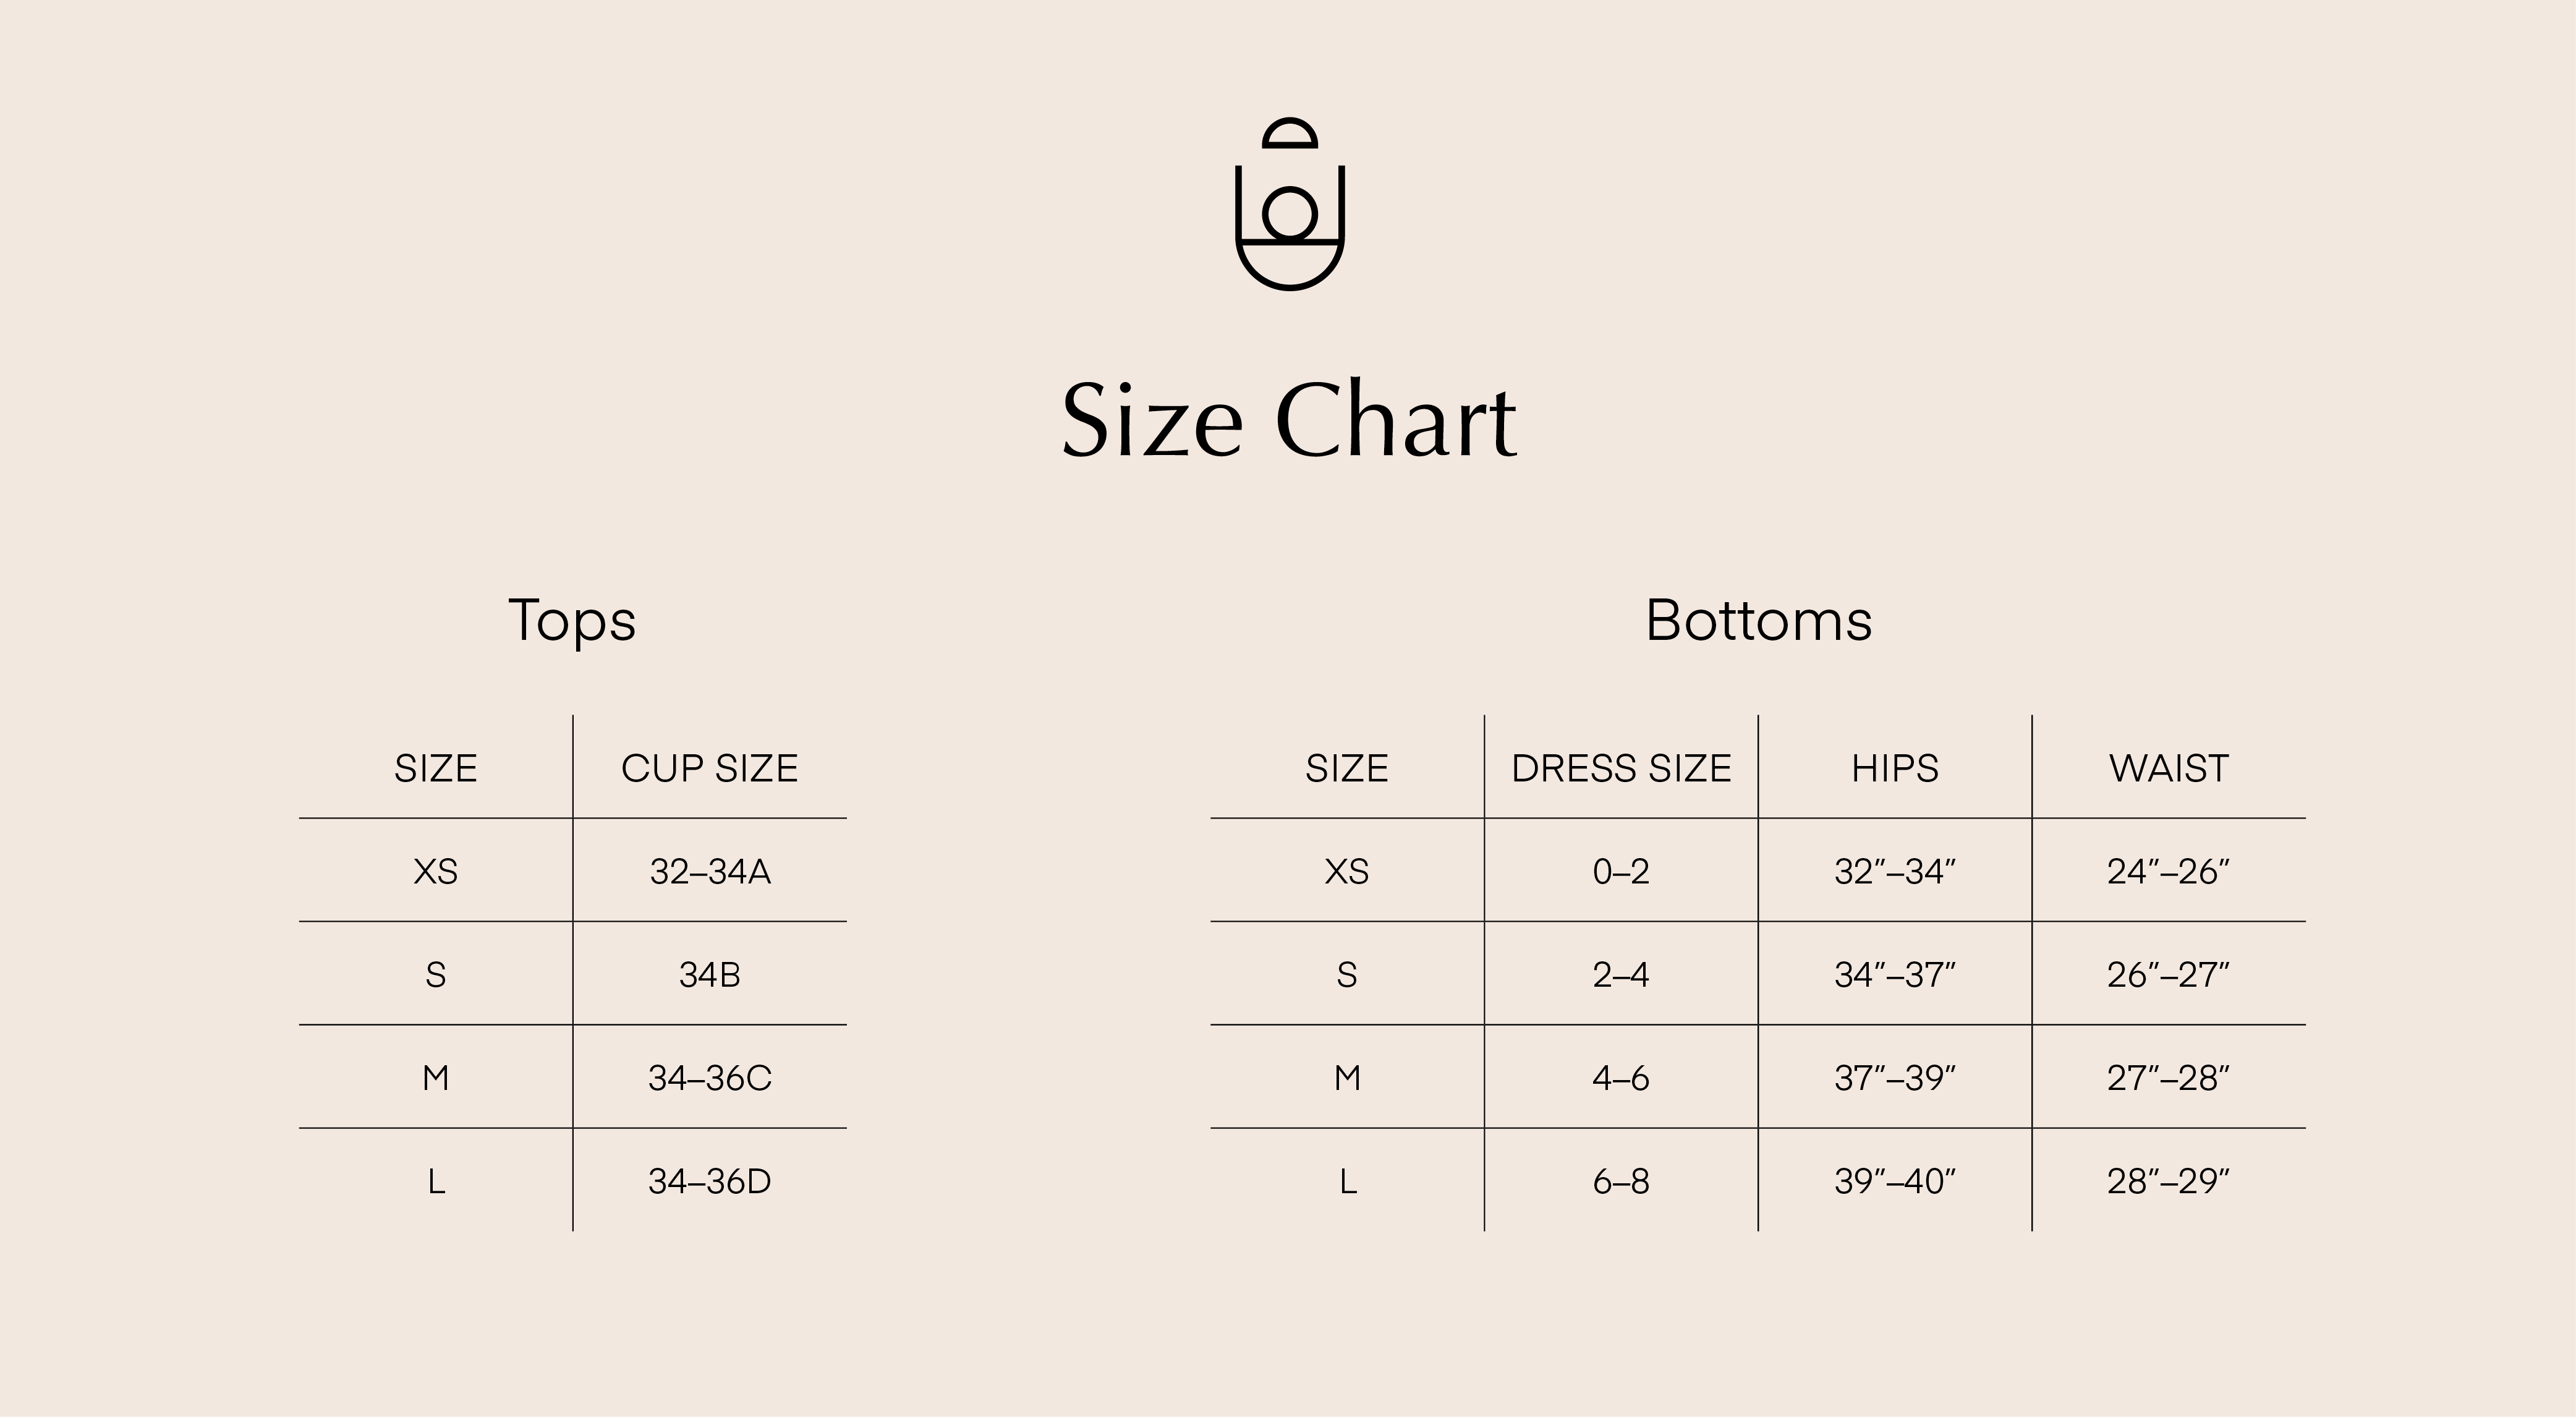 Stone Cold Fox Size Chart